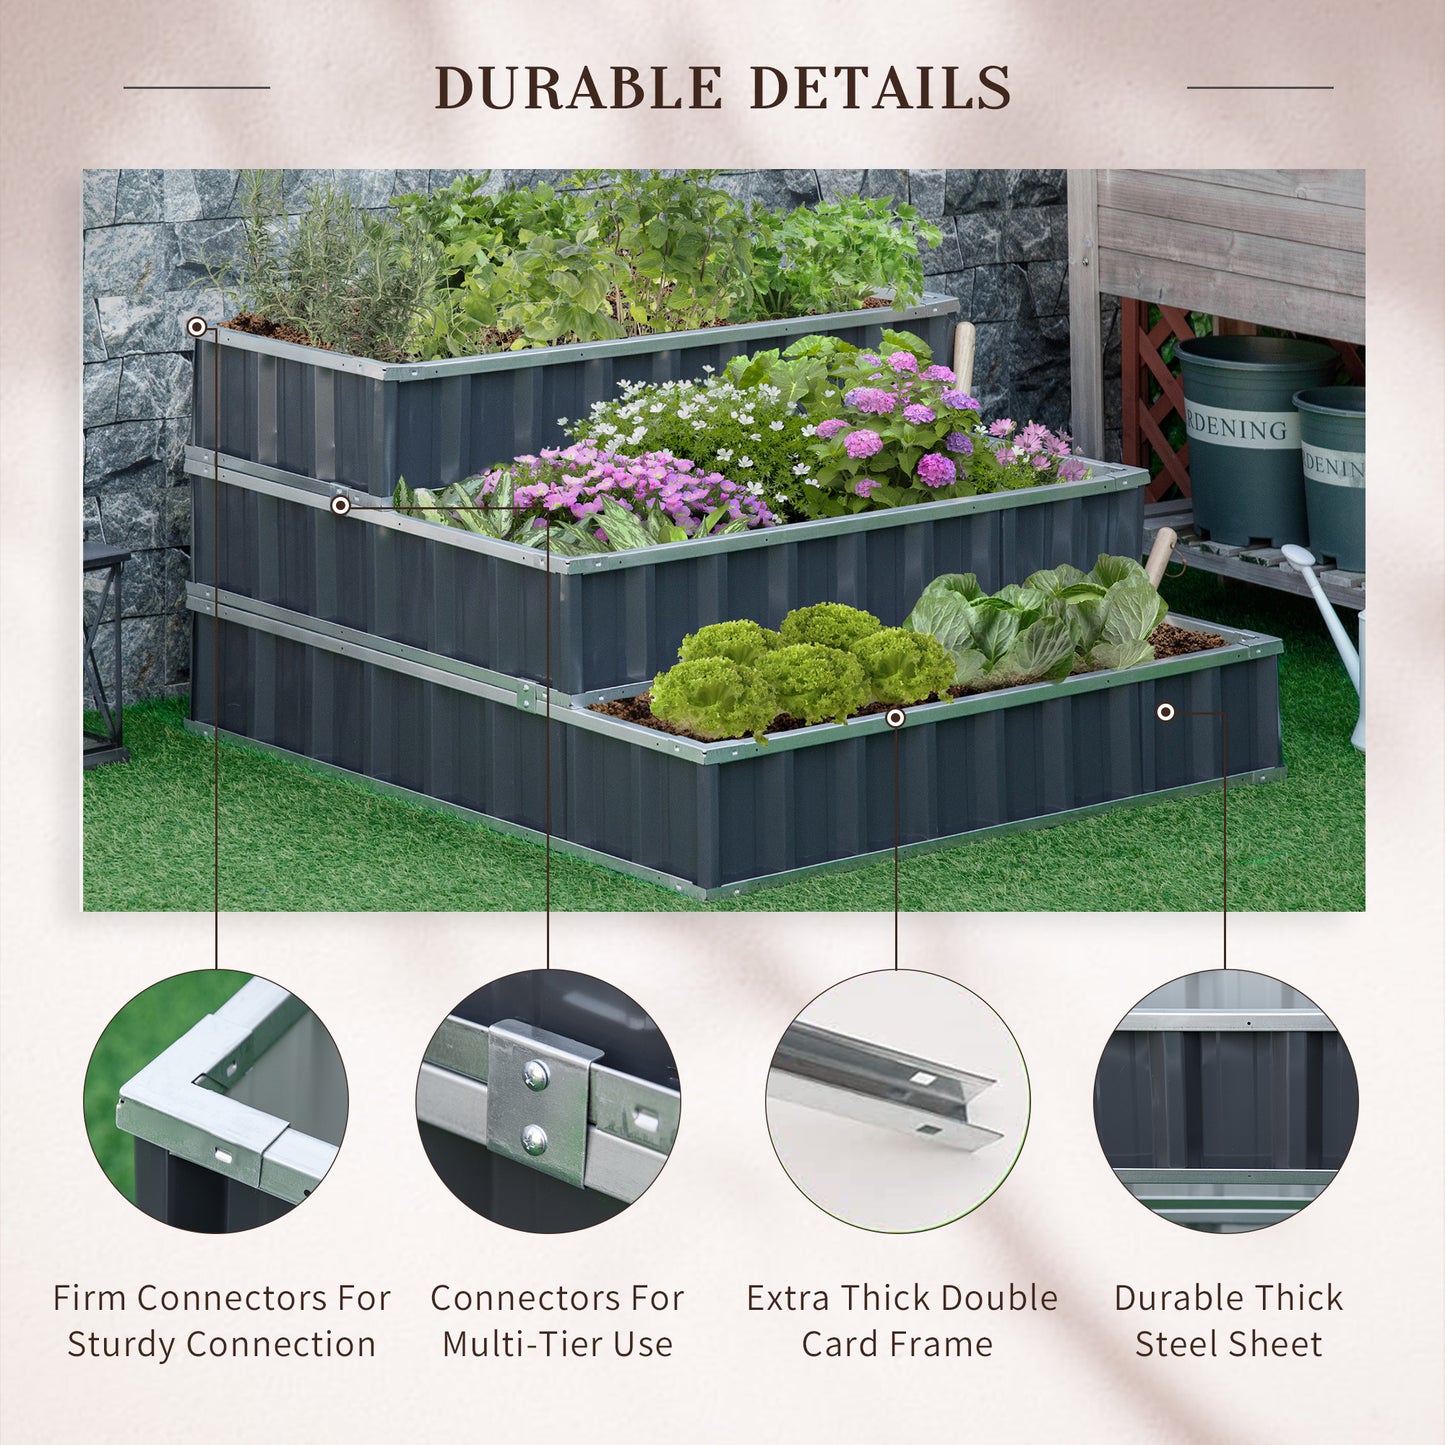 Outsunny 3 Tier Raised Garden Bed, Metal Elevated Planer Box Kit w/ A Pairs of Glove for Backyard, Patio to Grow Vegetables, Herbs, and Flowers, Grey Box,